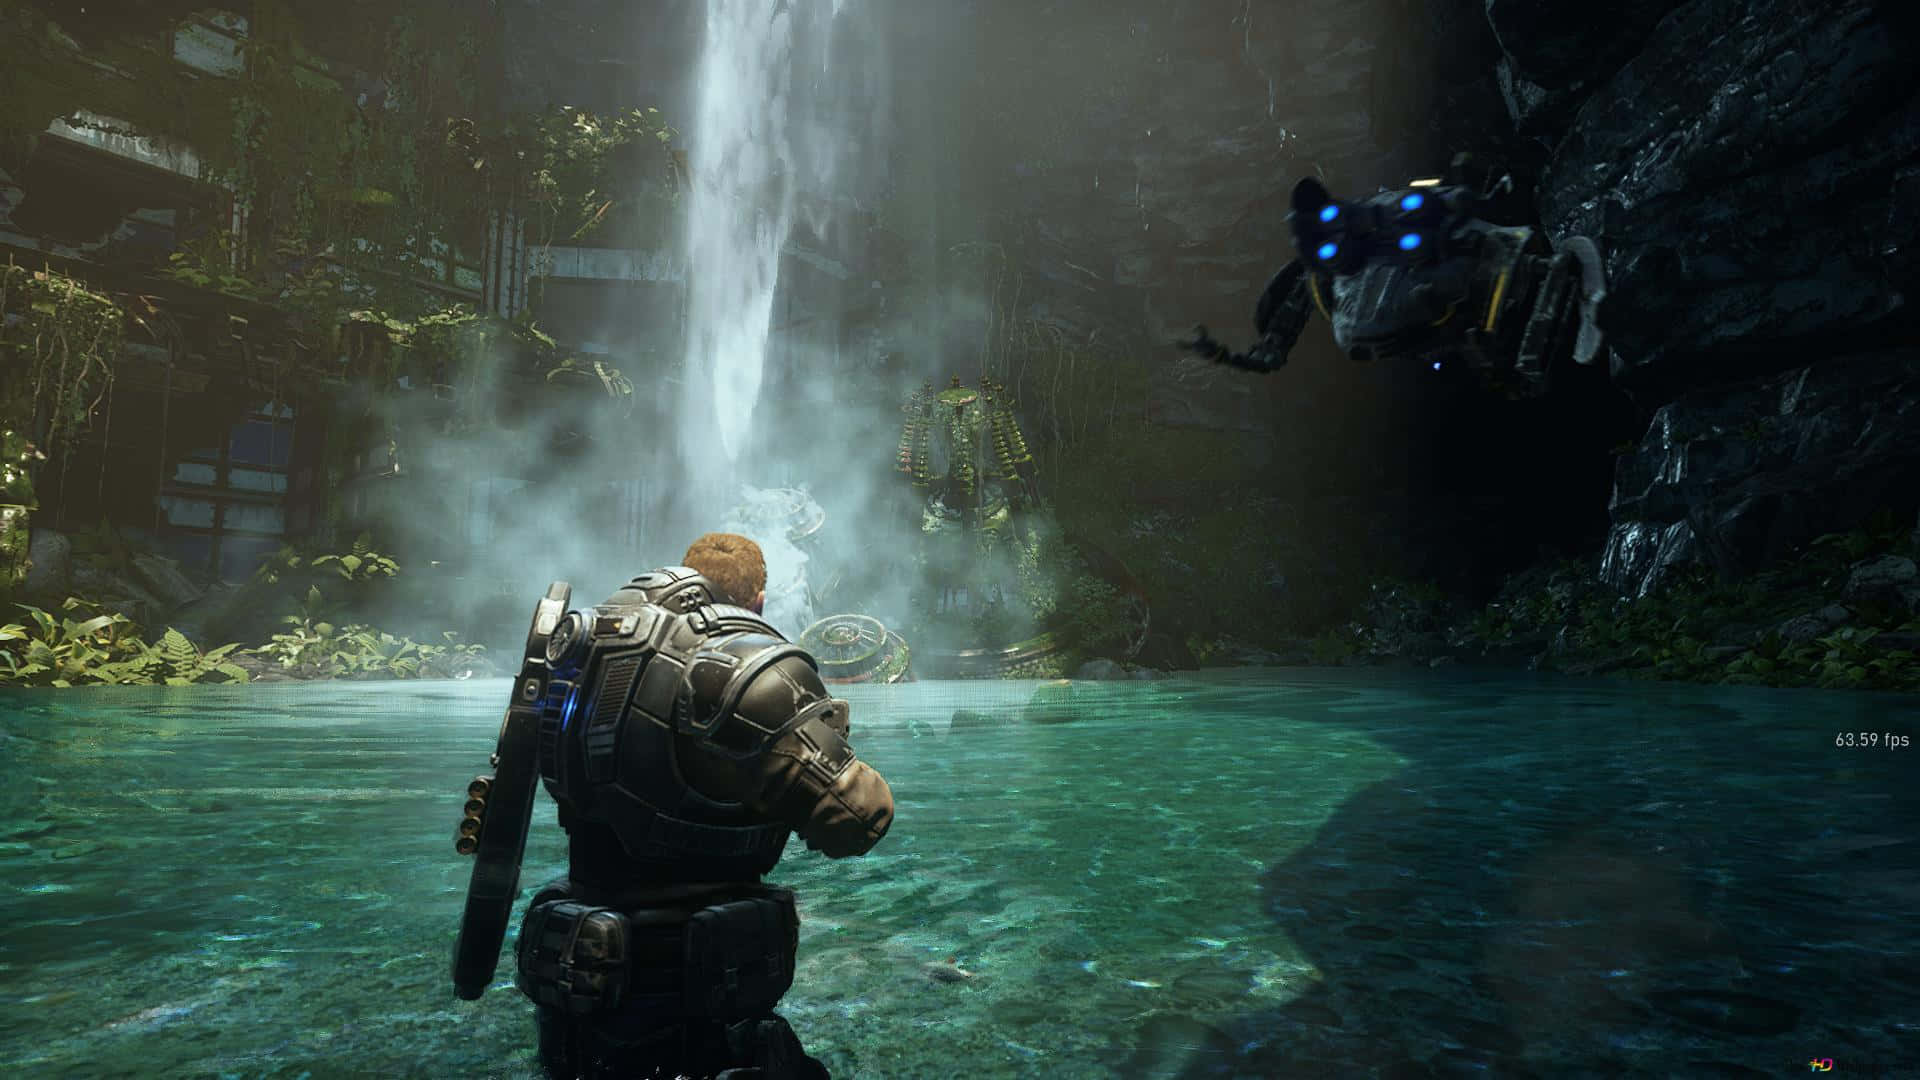 This image shows an epic Gears of War 5 battle on Sera